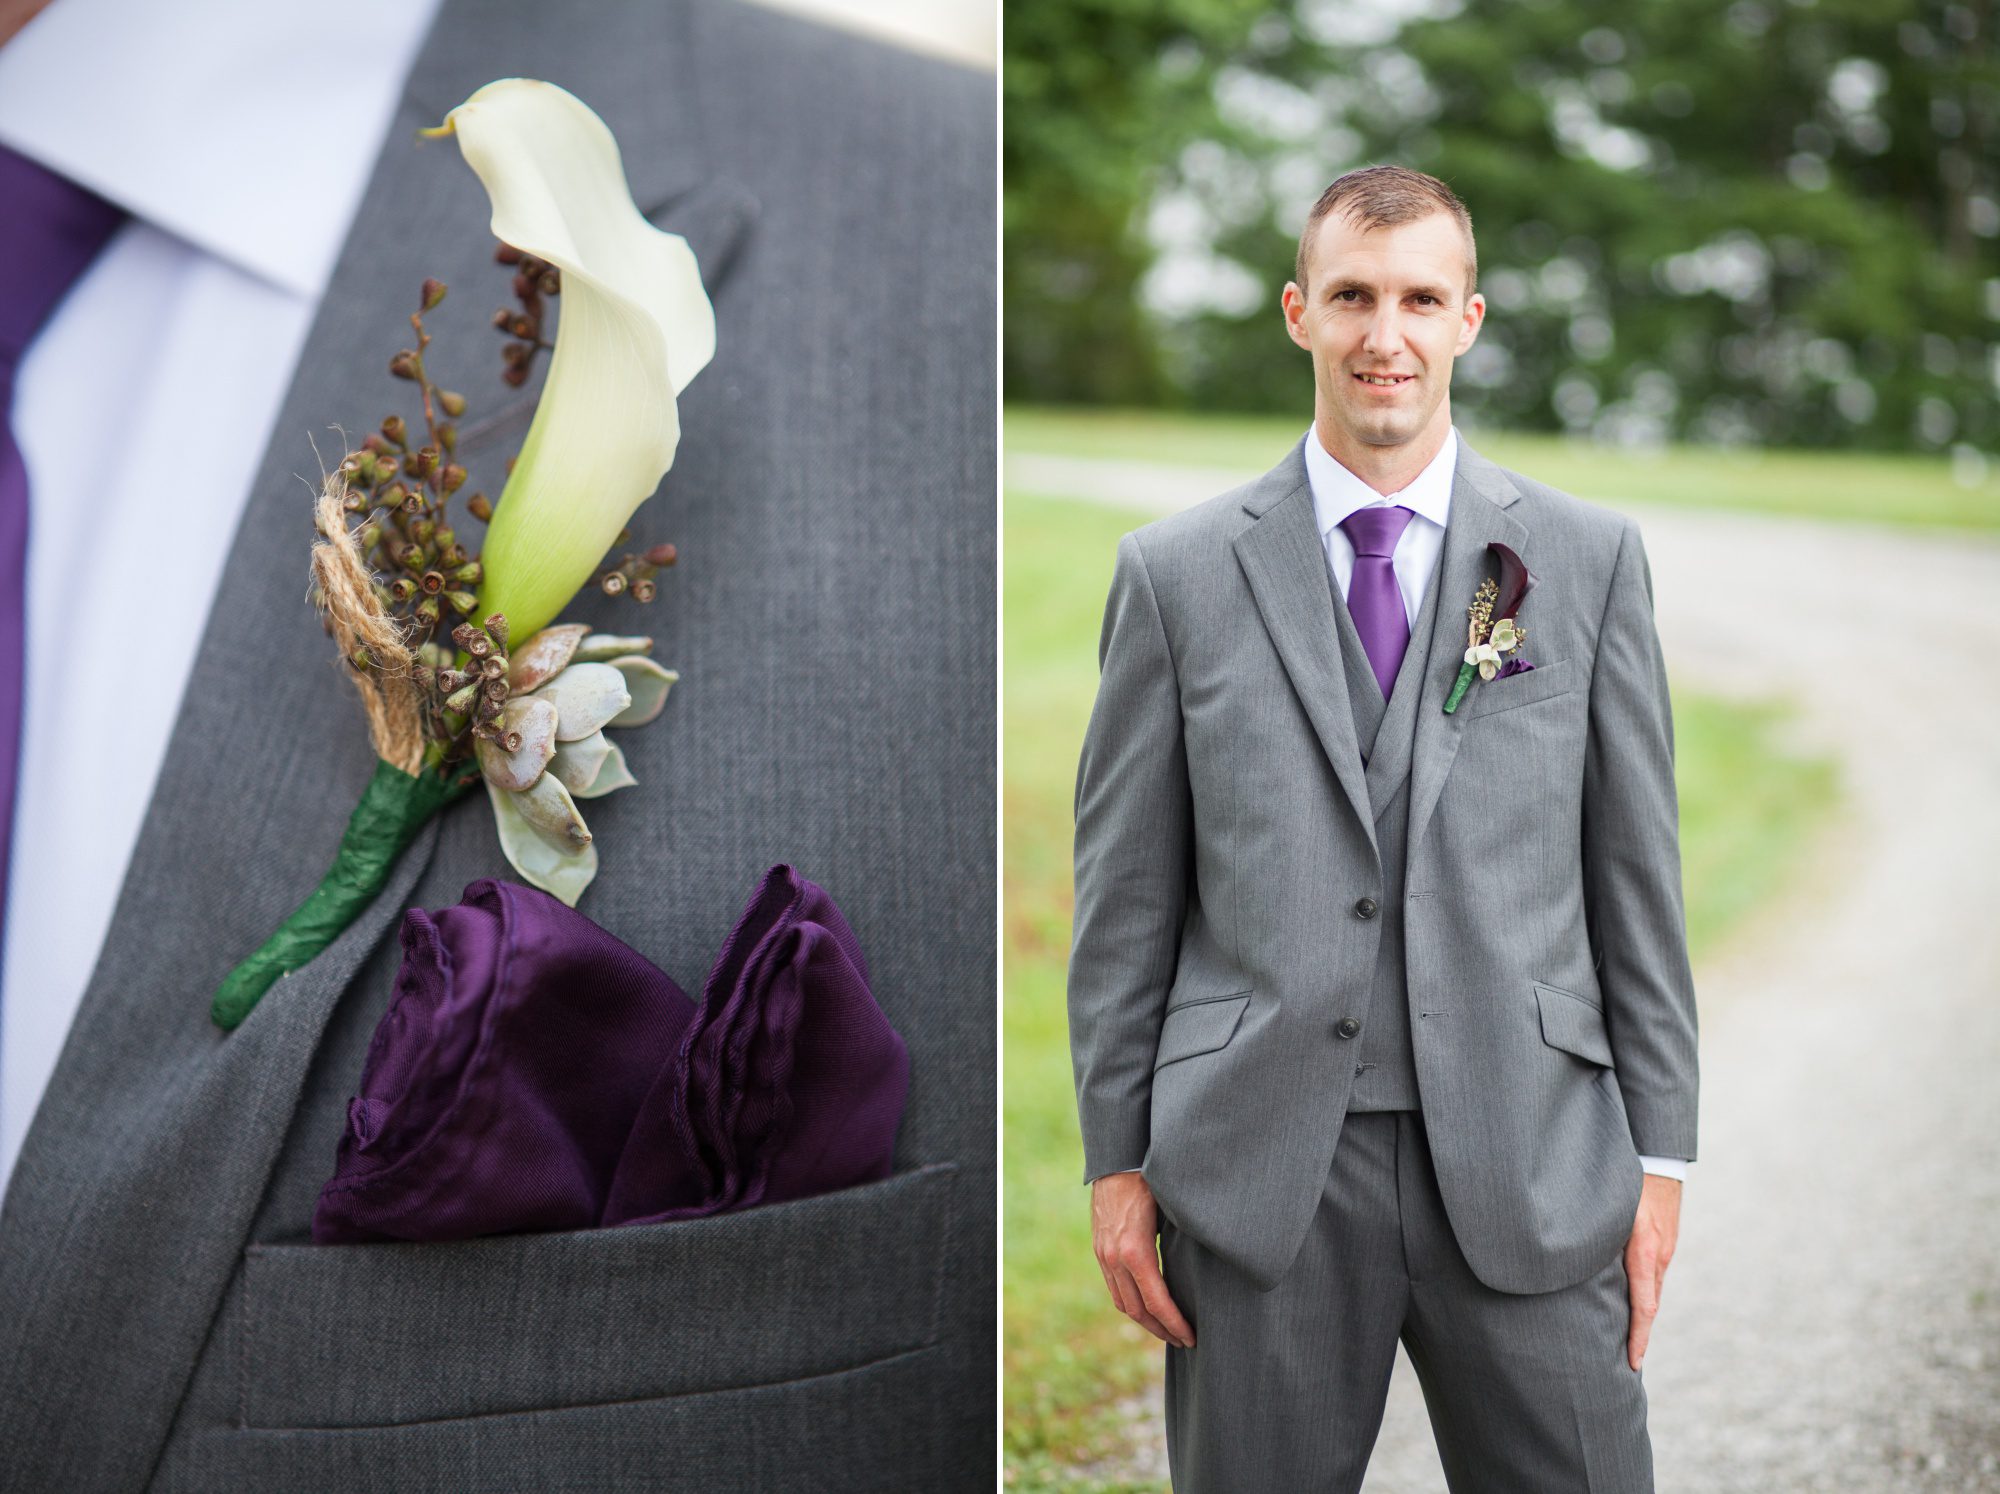 Groom portrait and boutonniere before summer wedding at Owen Farm in Chapmansboro, TN. Photography by Krista Lee Photography. 